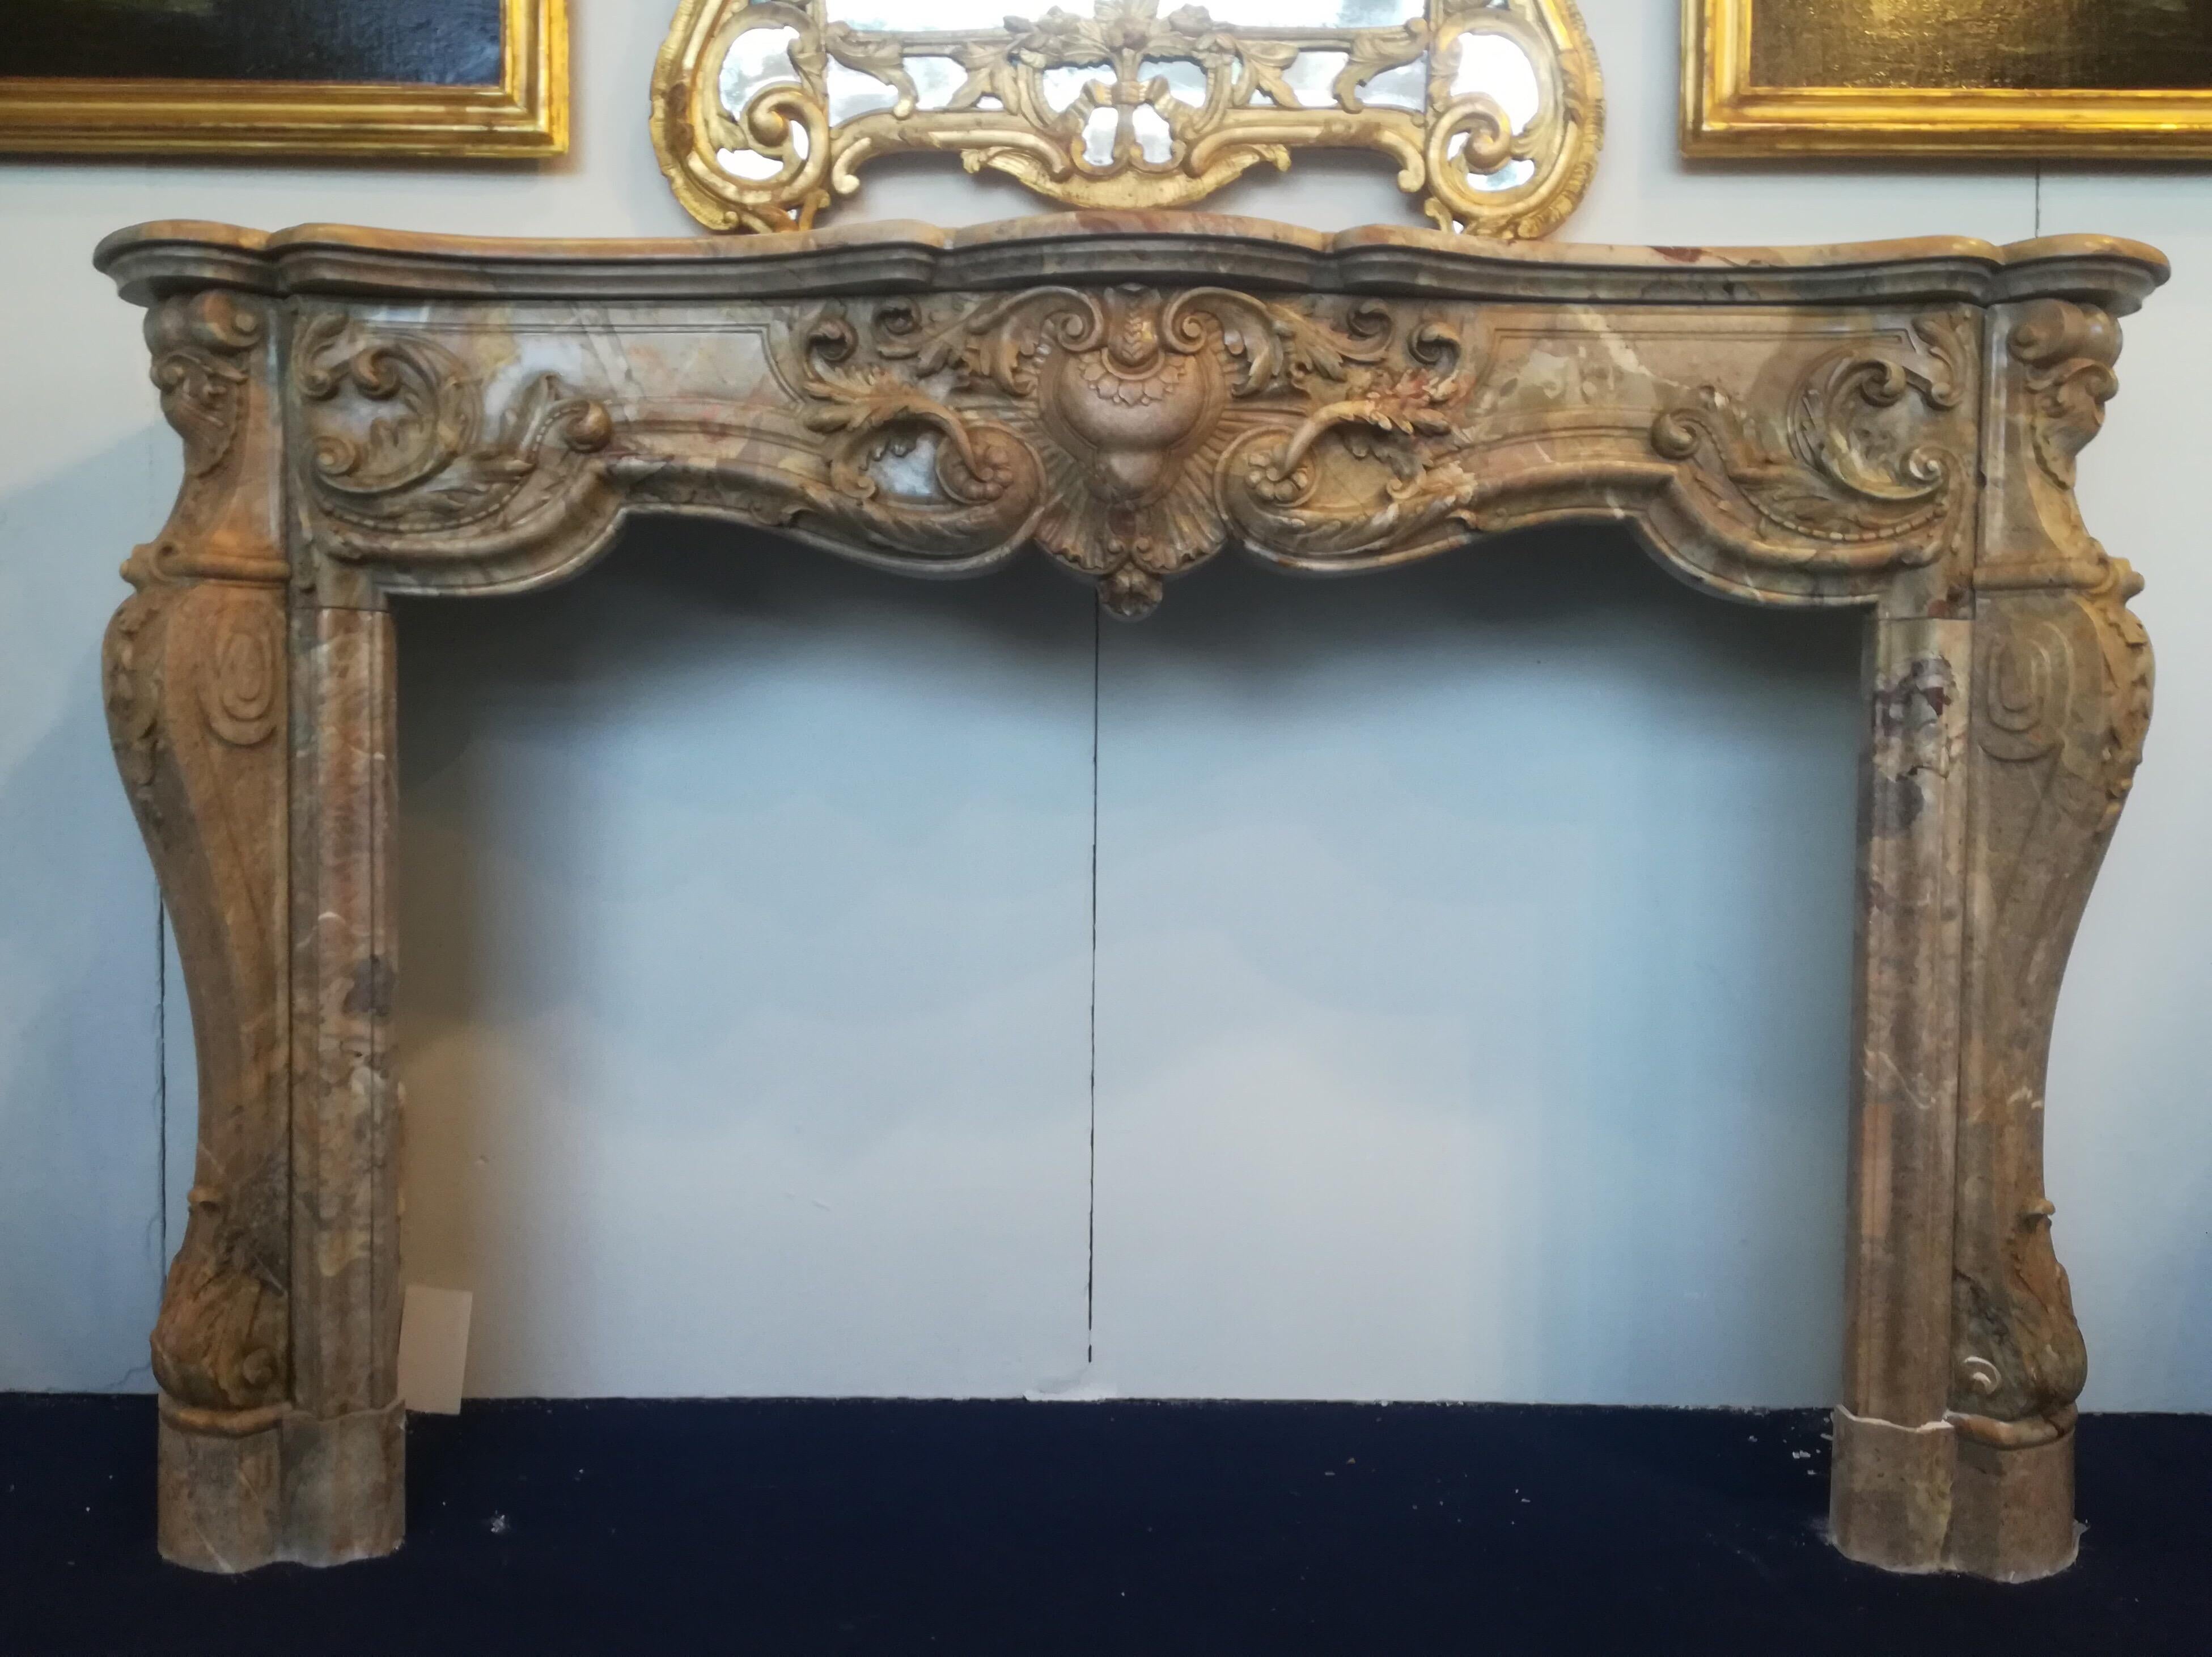 Louis XIV style, 19th century, (XIXth century) 
Superb and rare model of fireplace mantel made in Sarrancolin Fantastico marble. 

Dimensions of the fireplace hearth : width : 130cm / height : 87cm

